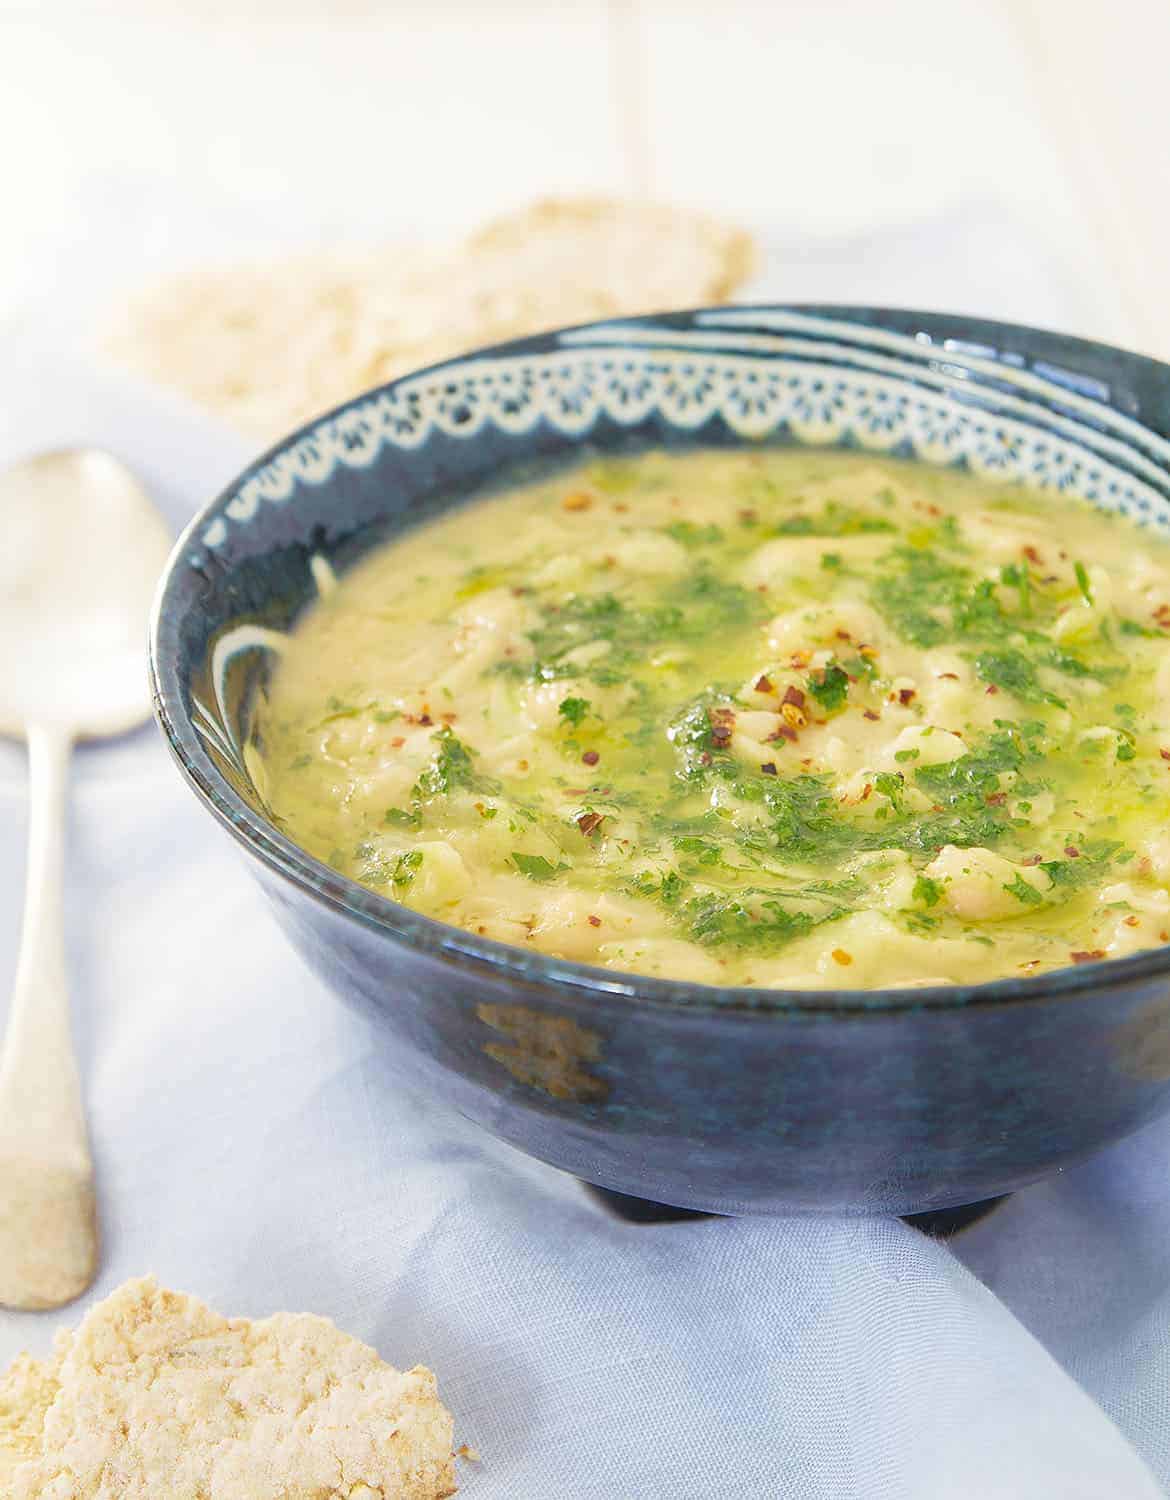 Thick white bean soup with parsley, chili flakes and olive oil in a blue bowl.